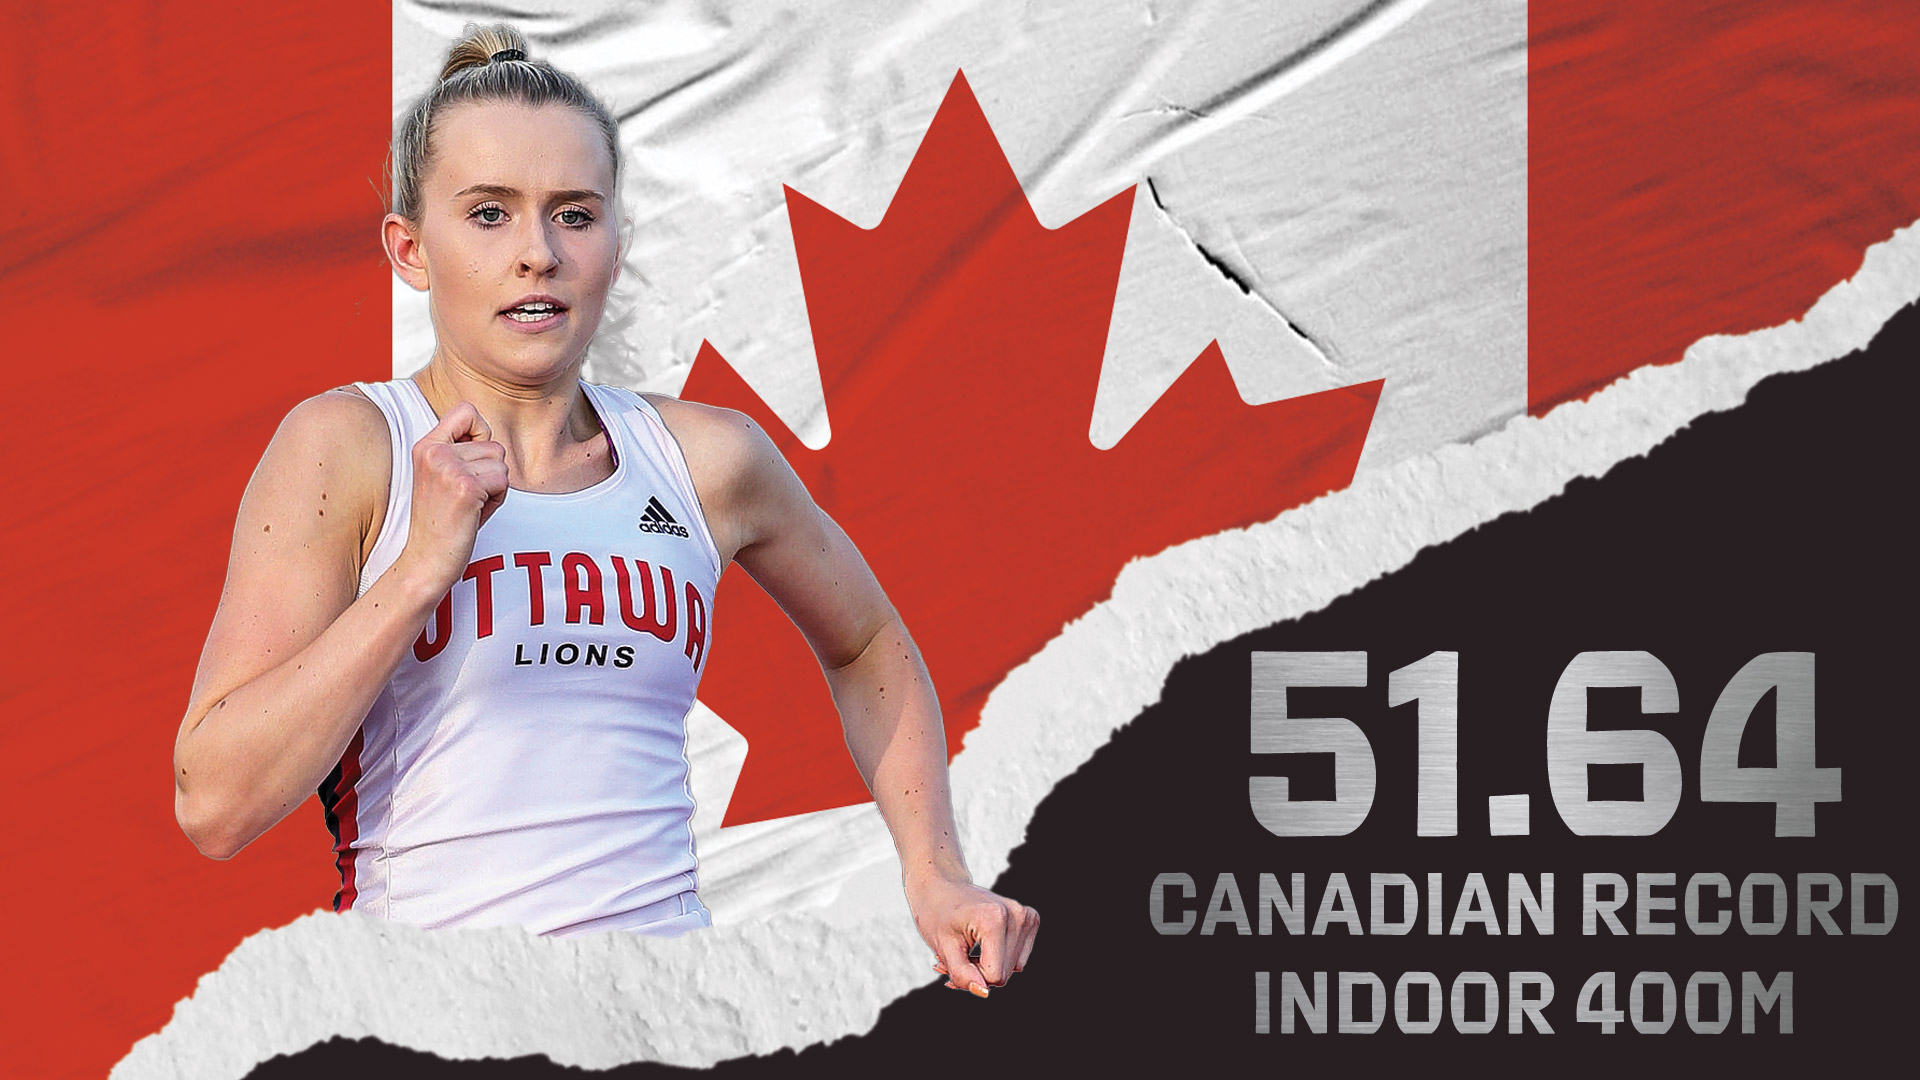 Gale Breaks 30 Year Old Canadian Indoor 400m Record Ottawa Lions Track And Field Club 